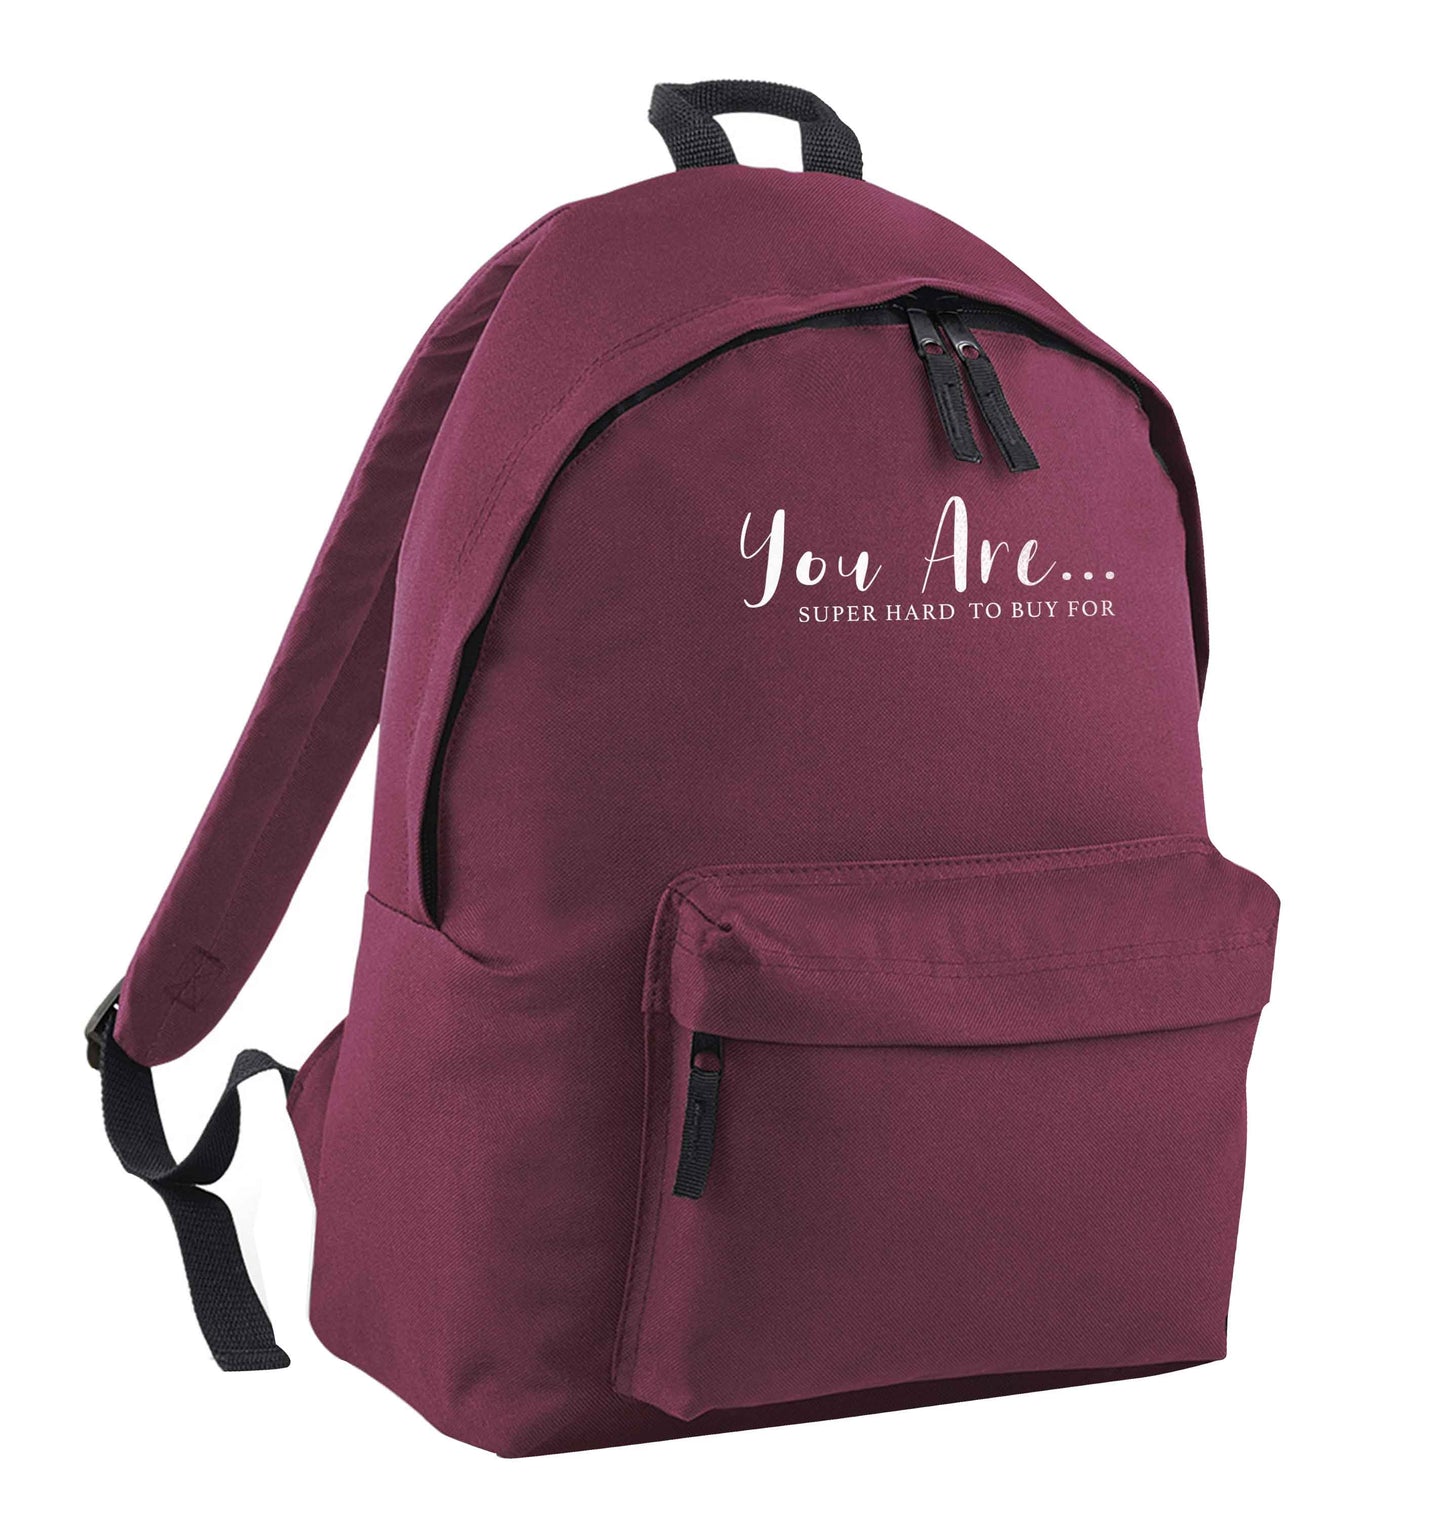 You are super hard to buy for maroon adults backpack